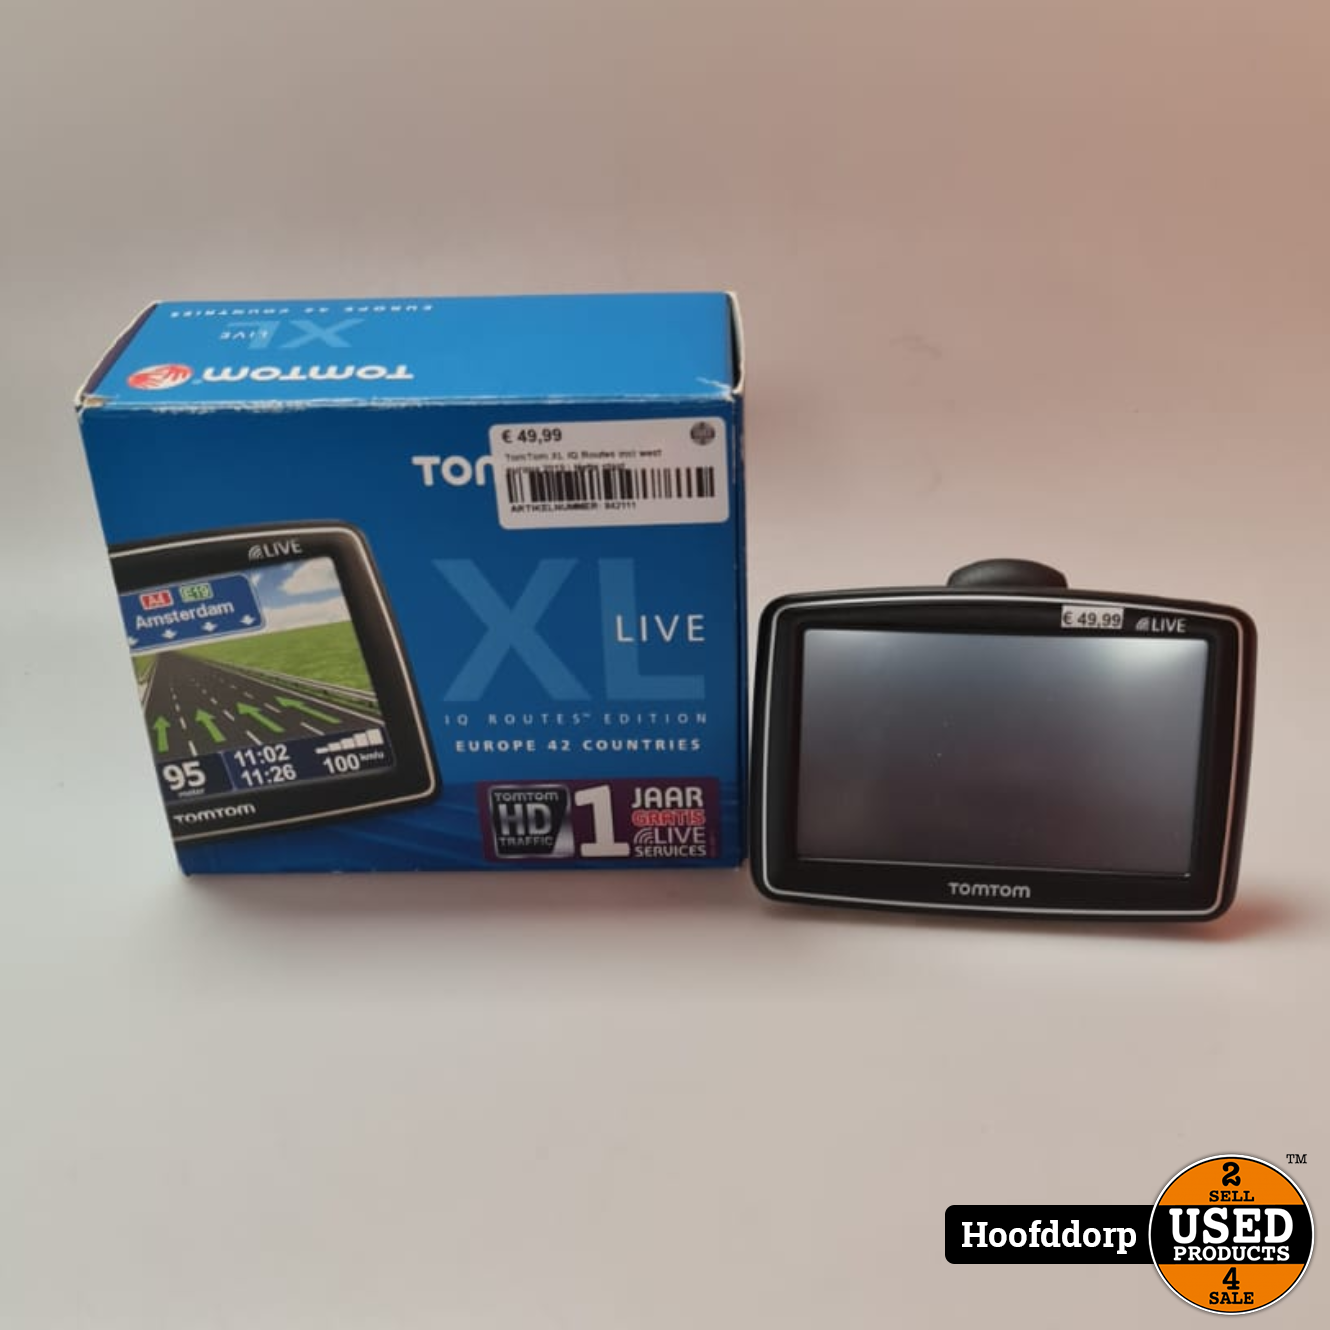 Minimaal Gedwongen extract TomTom XL IQ Routes incl west europa 2019 | Nette staat - Used Products  Hoofddorp